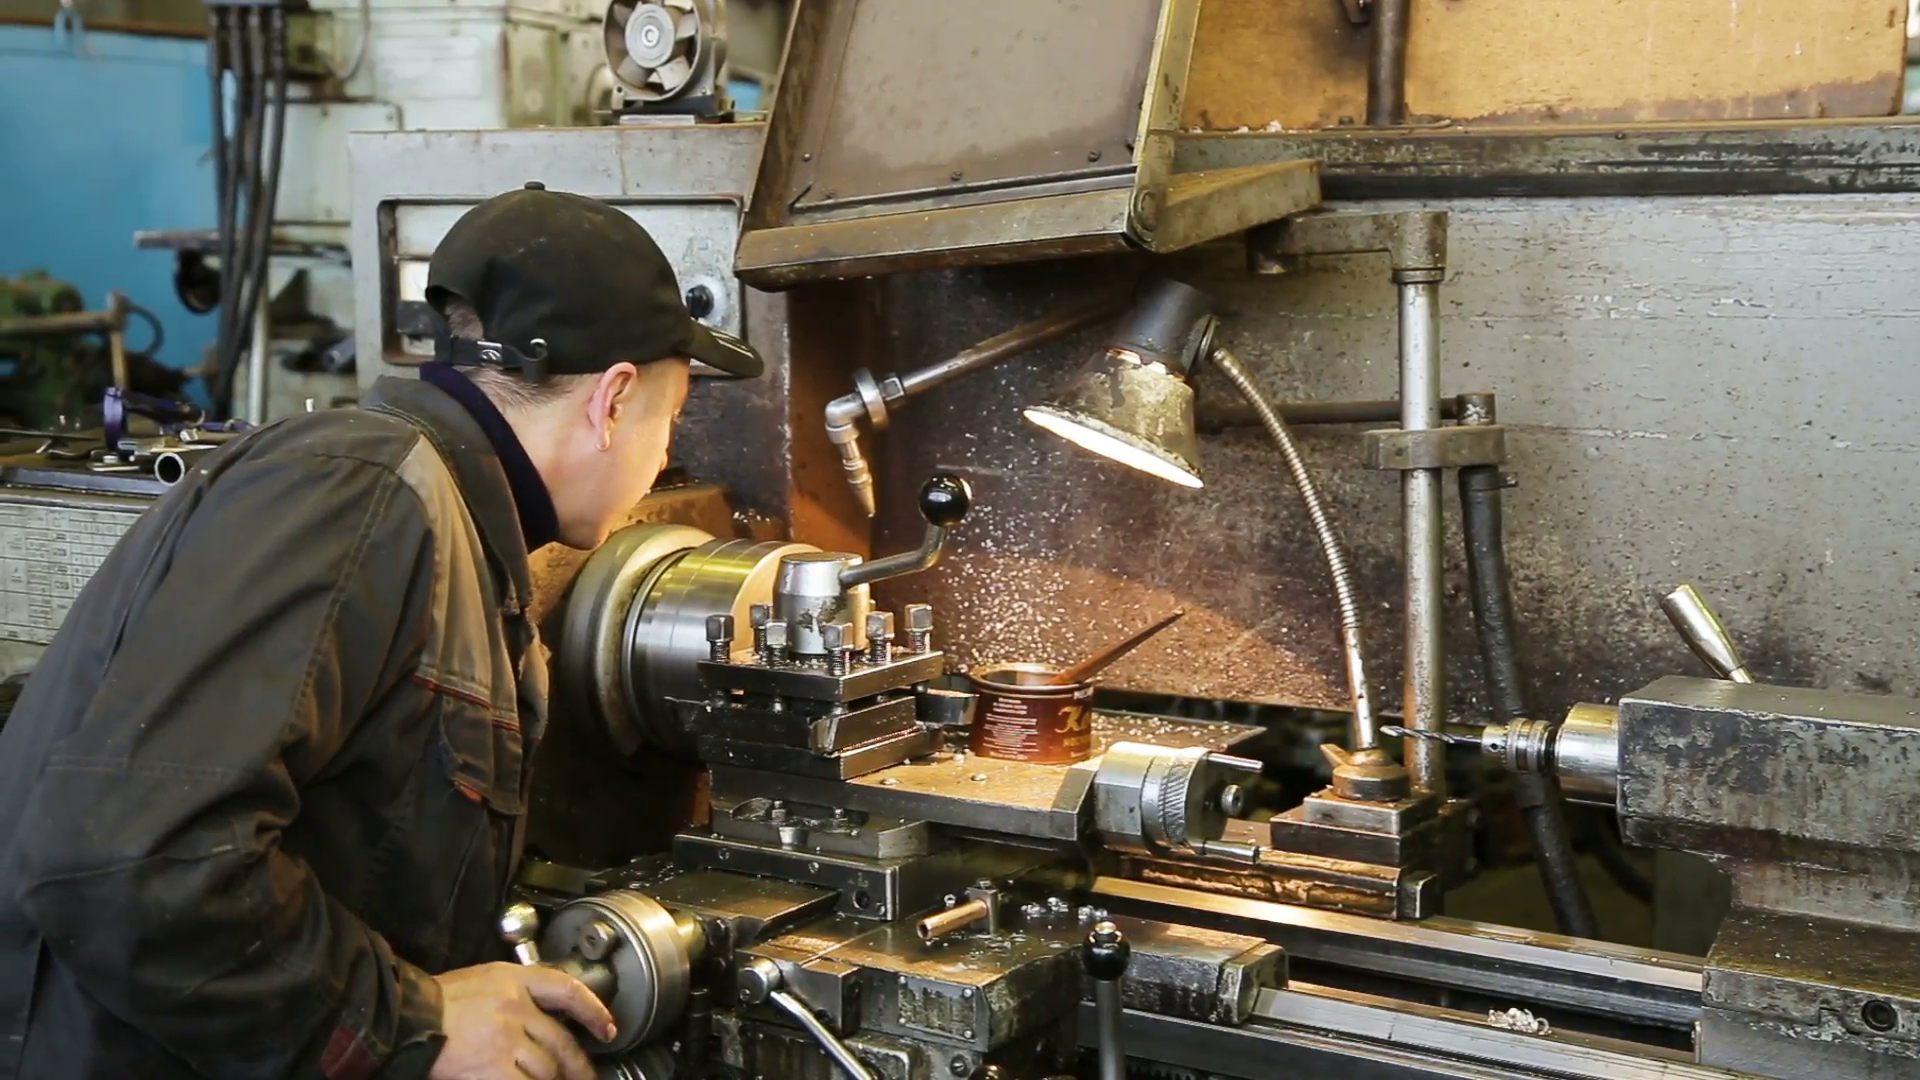 Turning lathe in action. Facing operation of a metal blank on ...